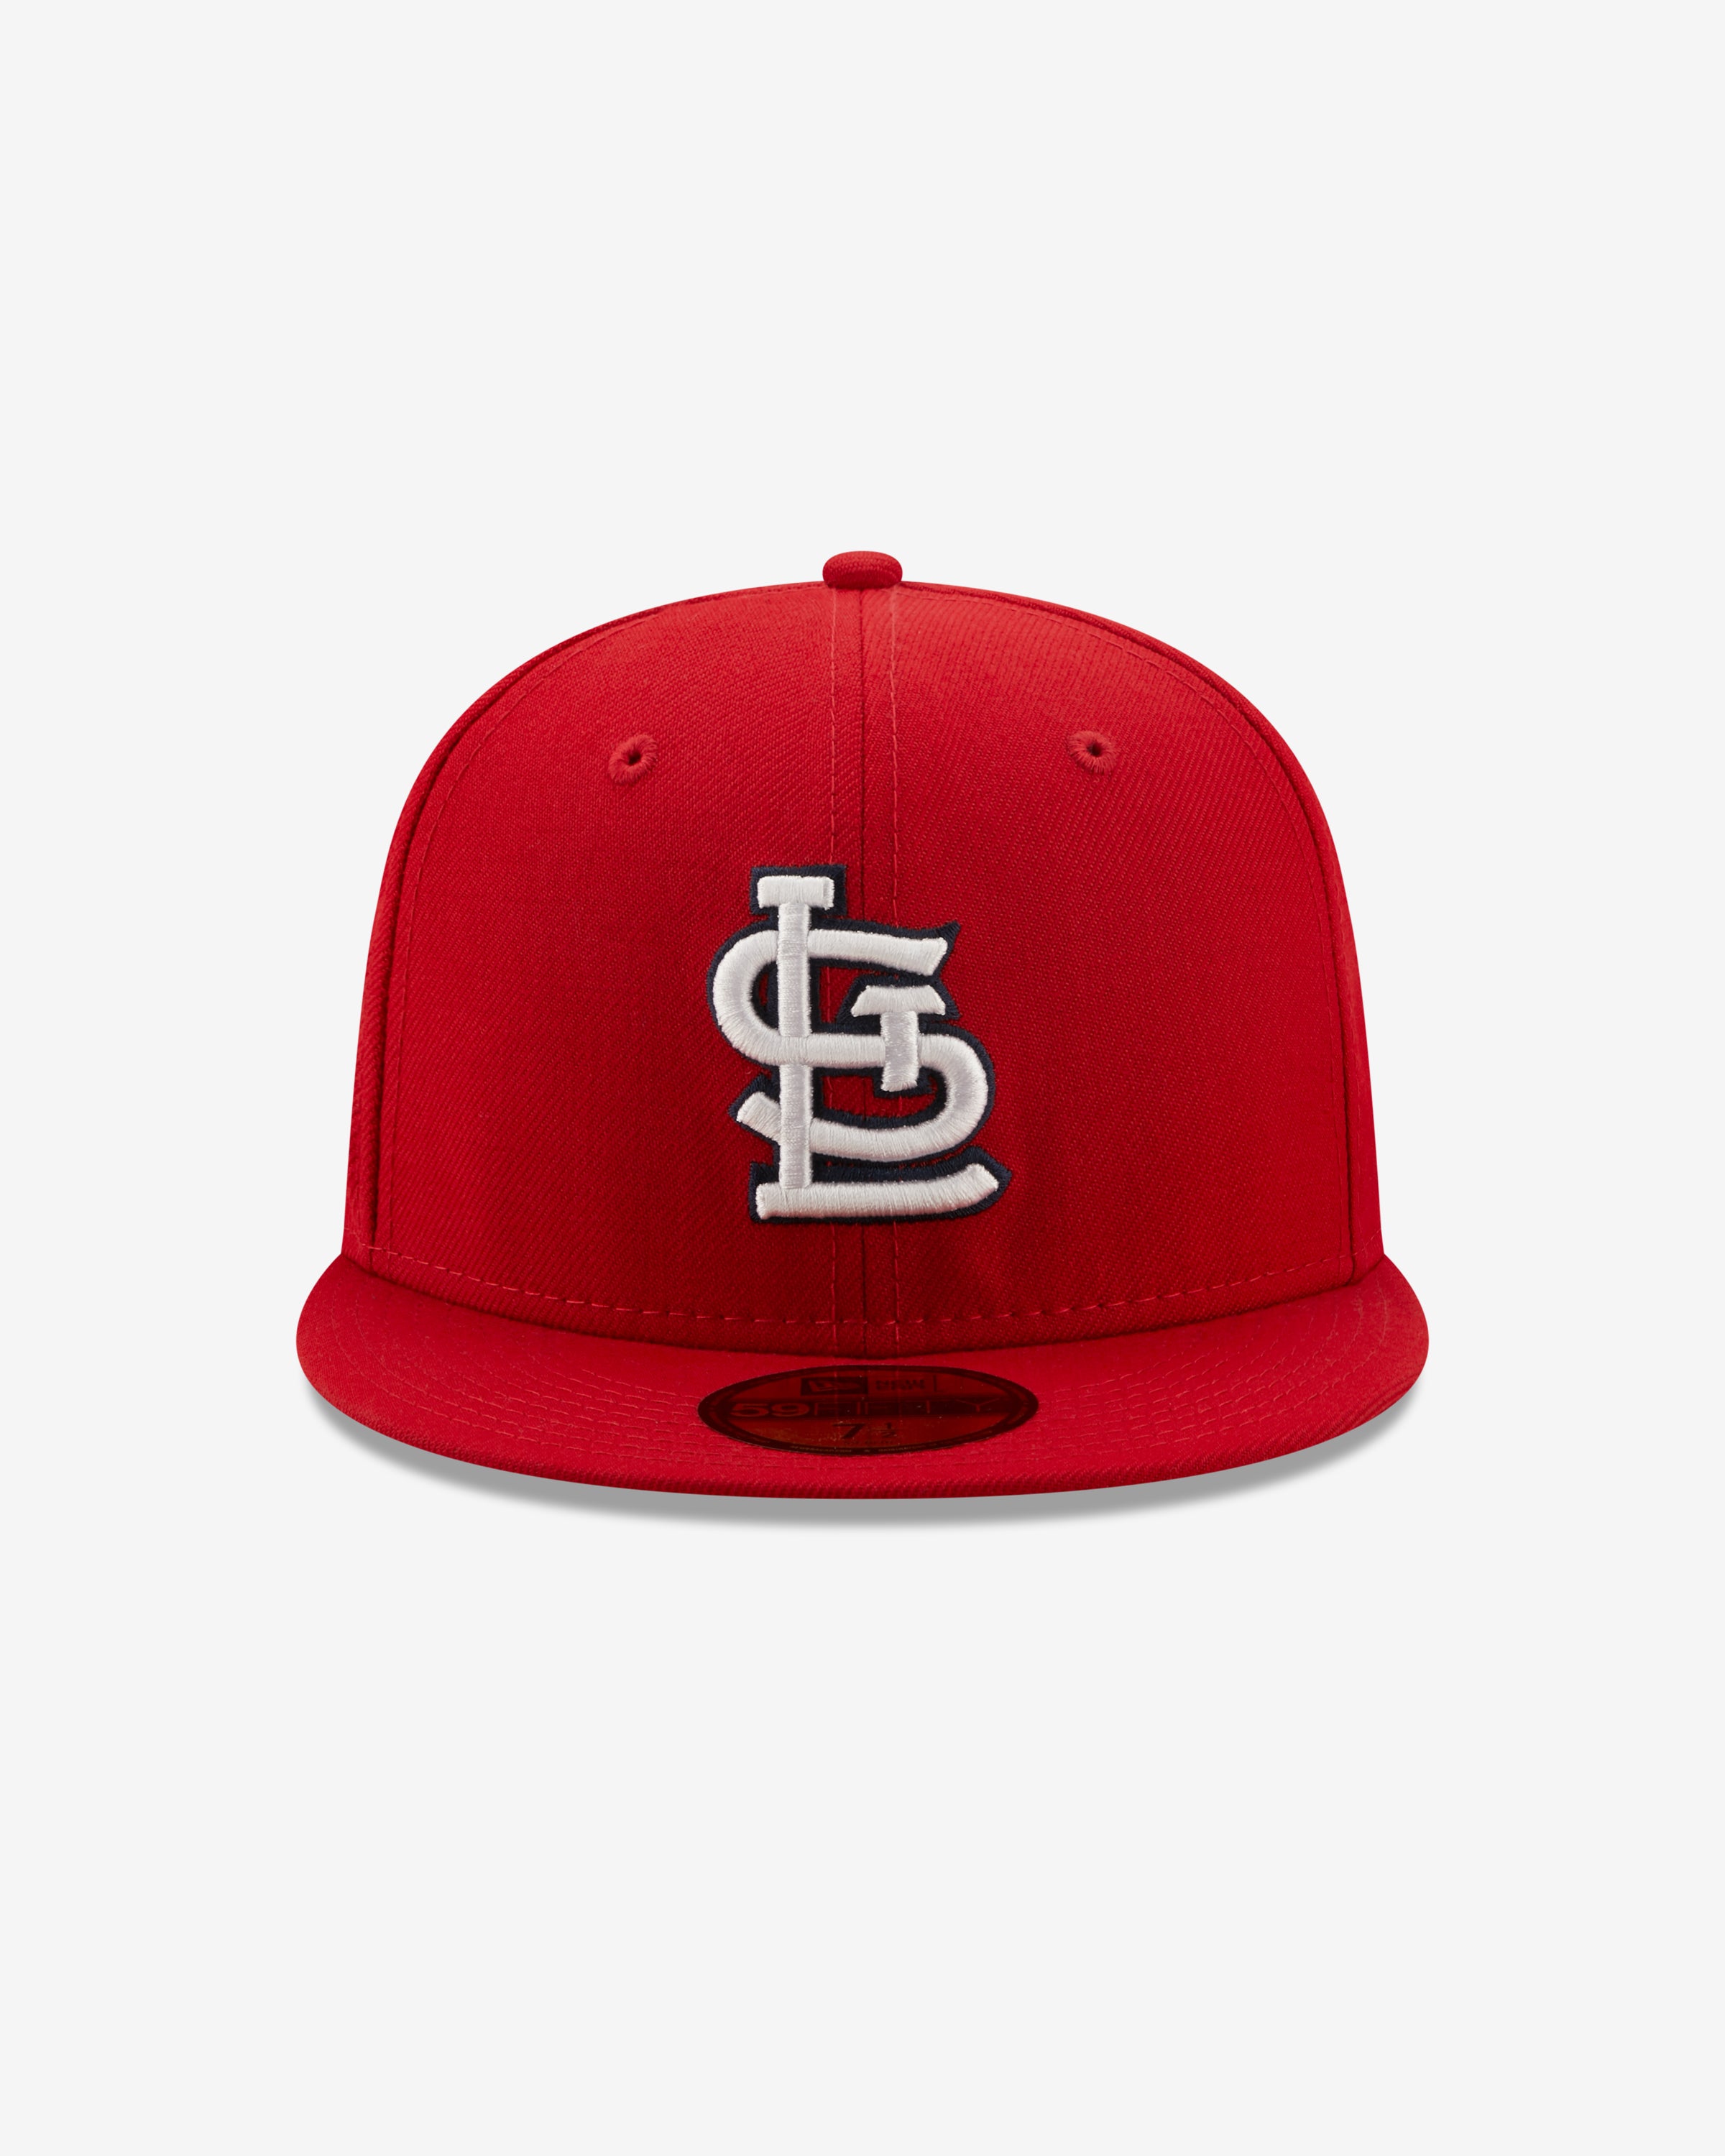 NEW ERA LOGO HISTORY 59FIFTY FITTED - ST. LOUIS CARDINALS (1982)